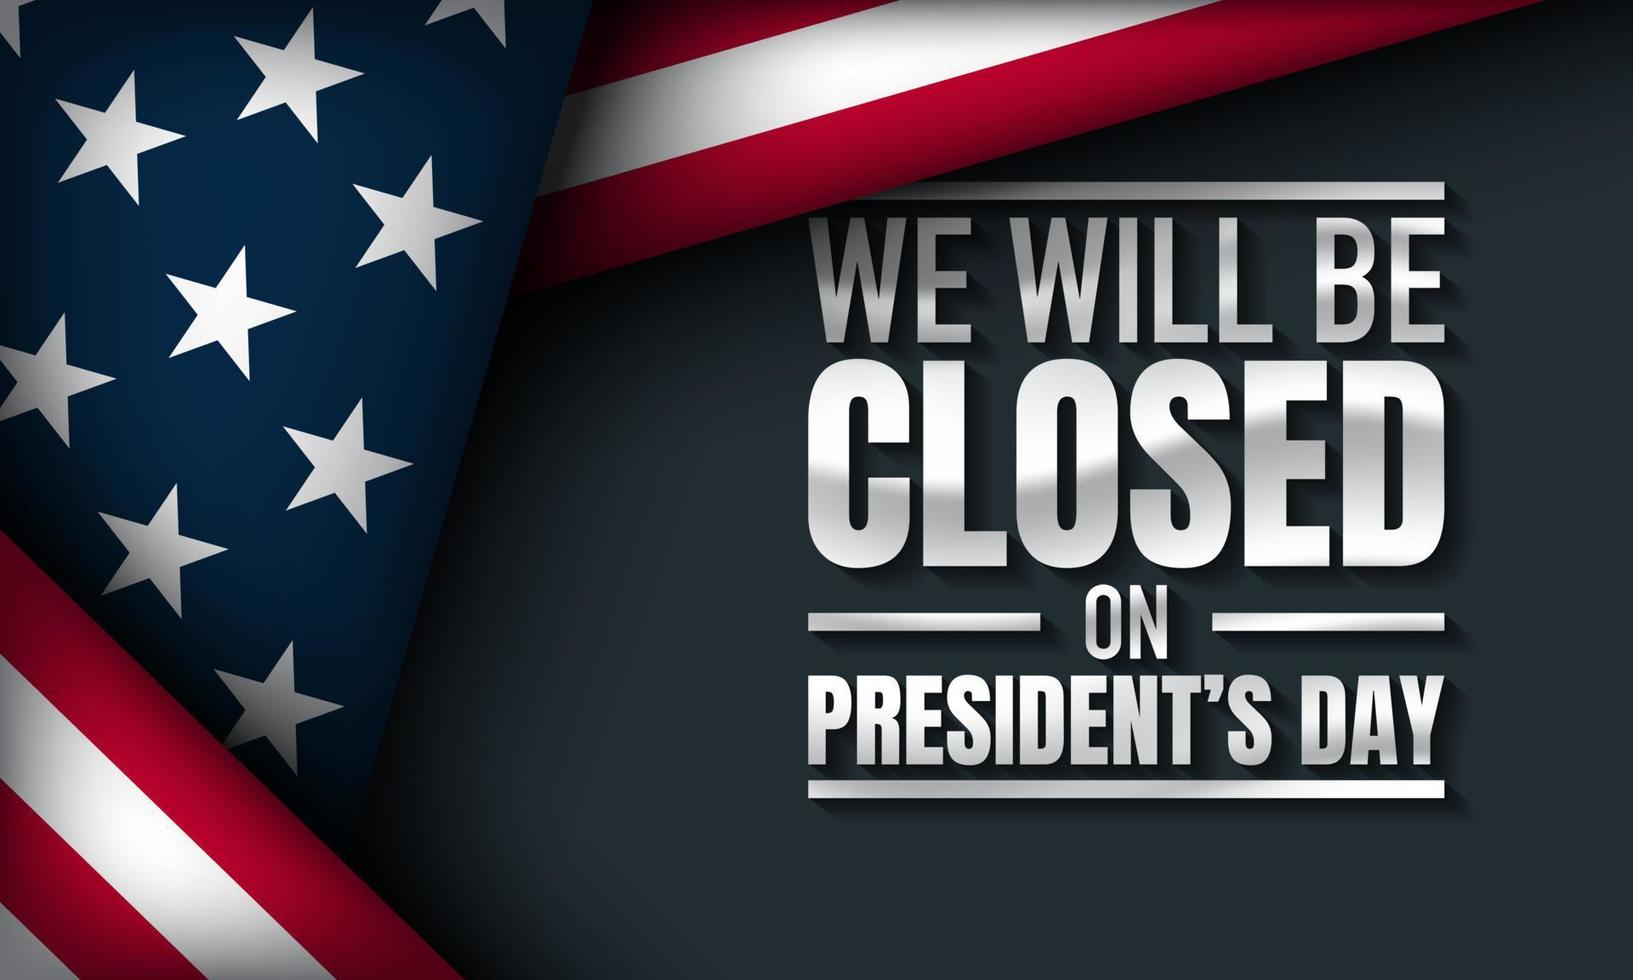 President's Day Background Design. We will be Closed on President's Day. vector